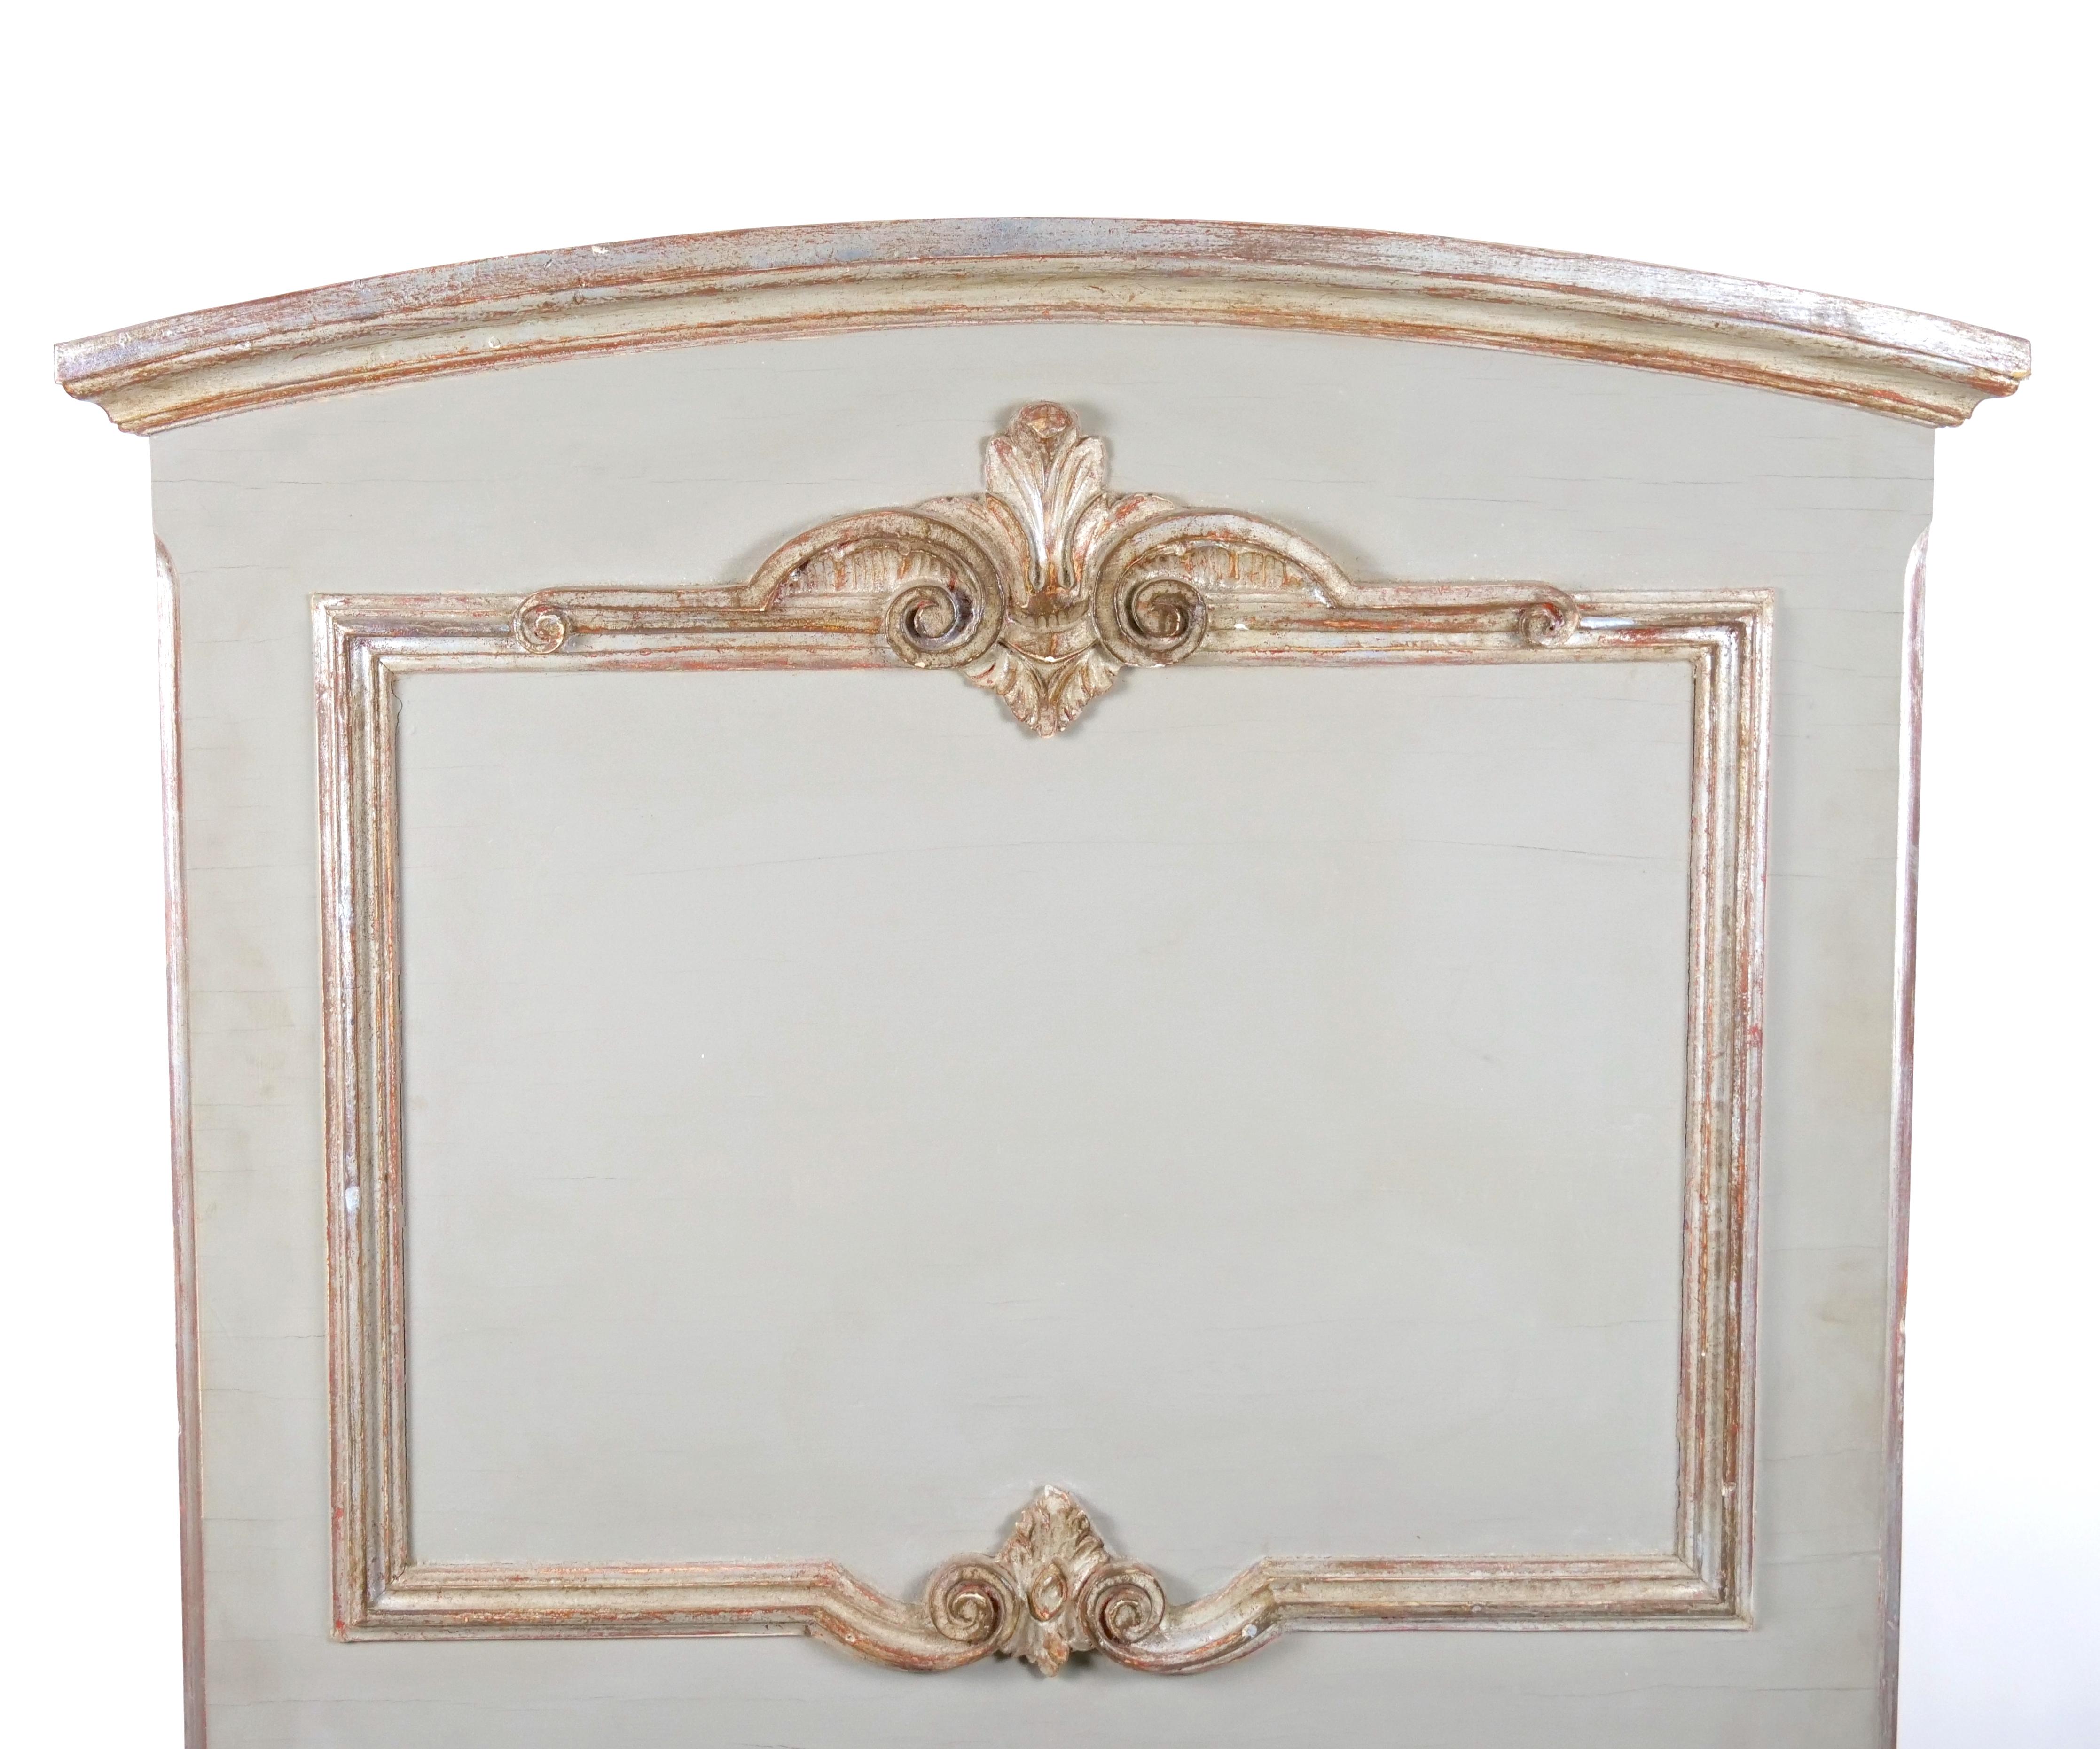 
Immerse yourself in the enchanting world of French sophistication with this exquisite trumeau wall mirror. Crafted with meticulous artistry, it features  stunning silvered and gilt wood hand-painted frame that emanates opulence and elegance. The